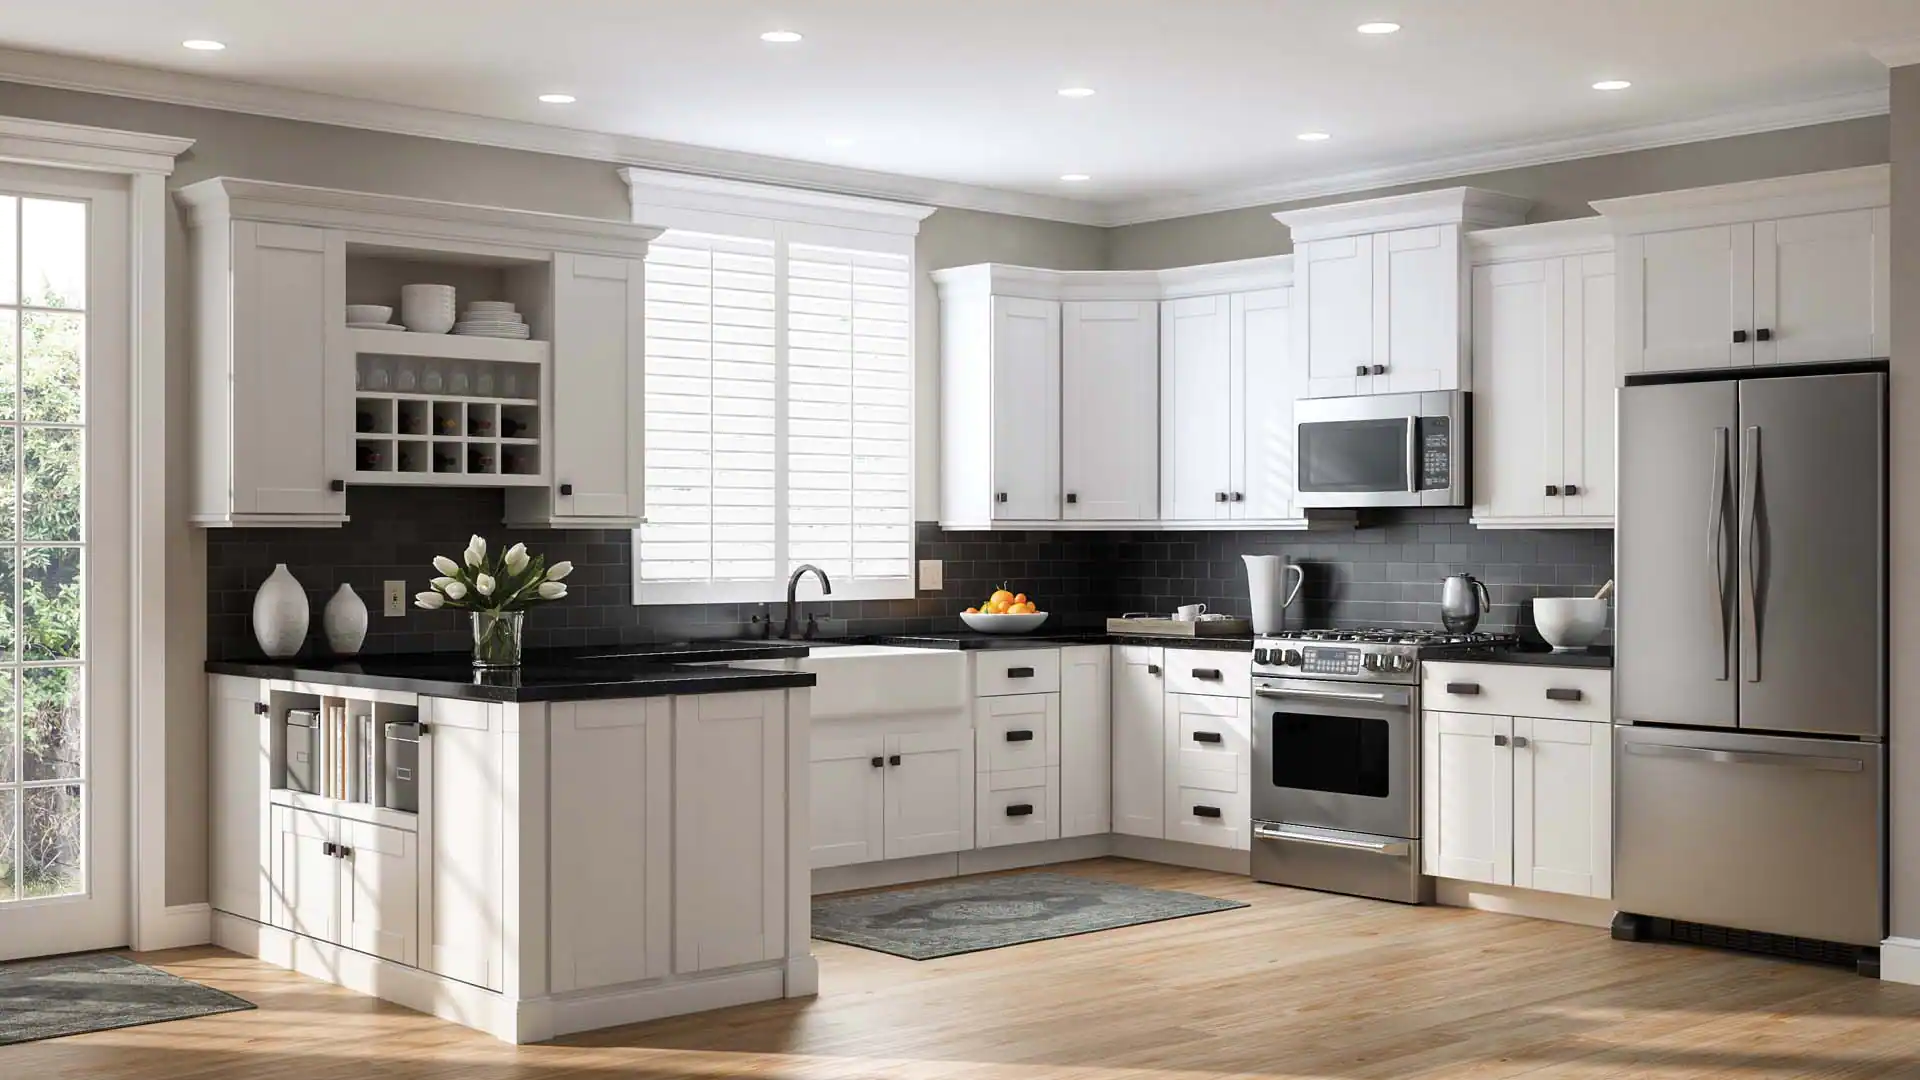 Styles of Shaker Cabinets